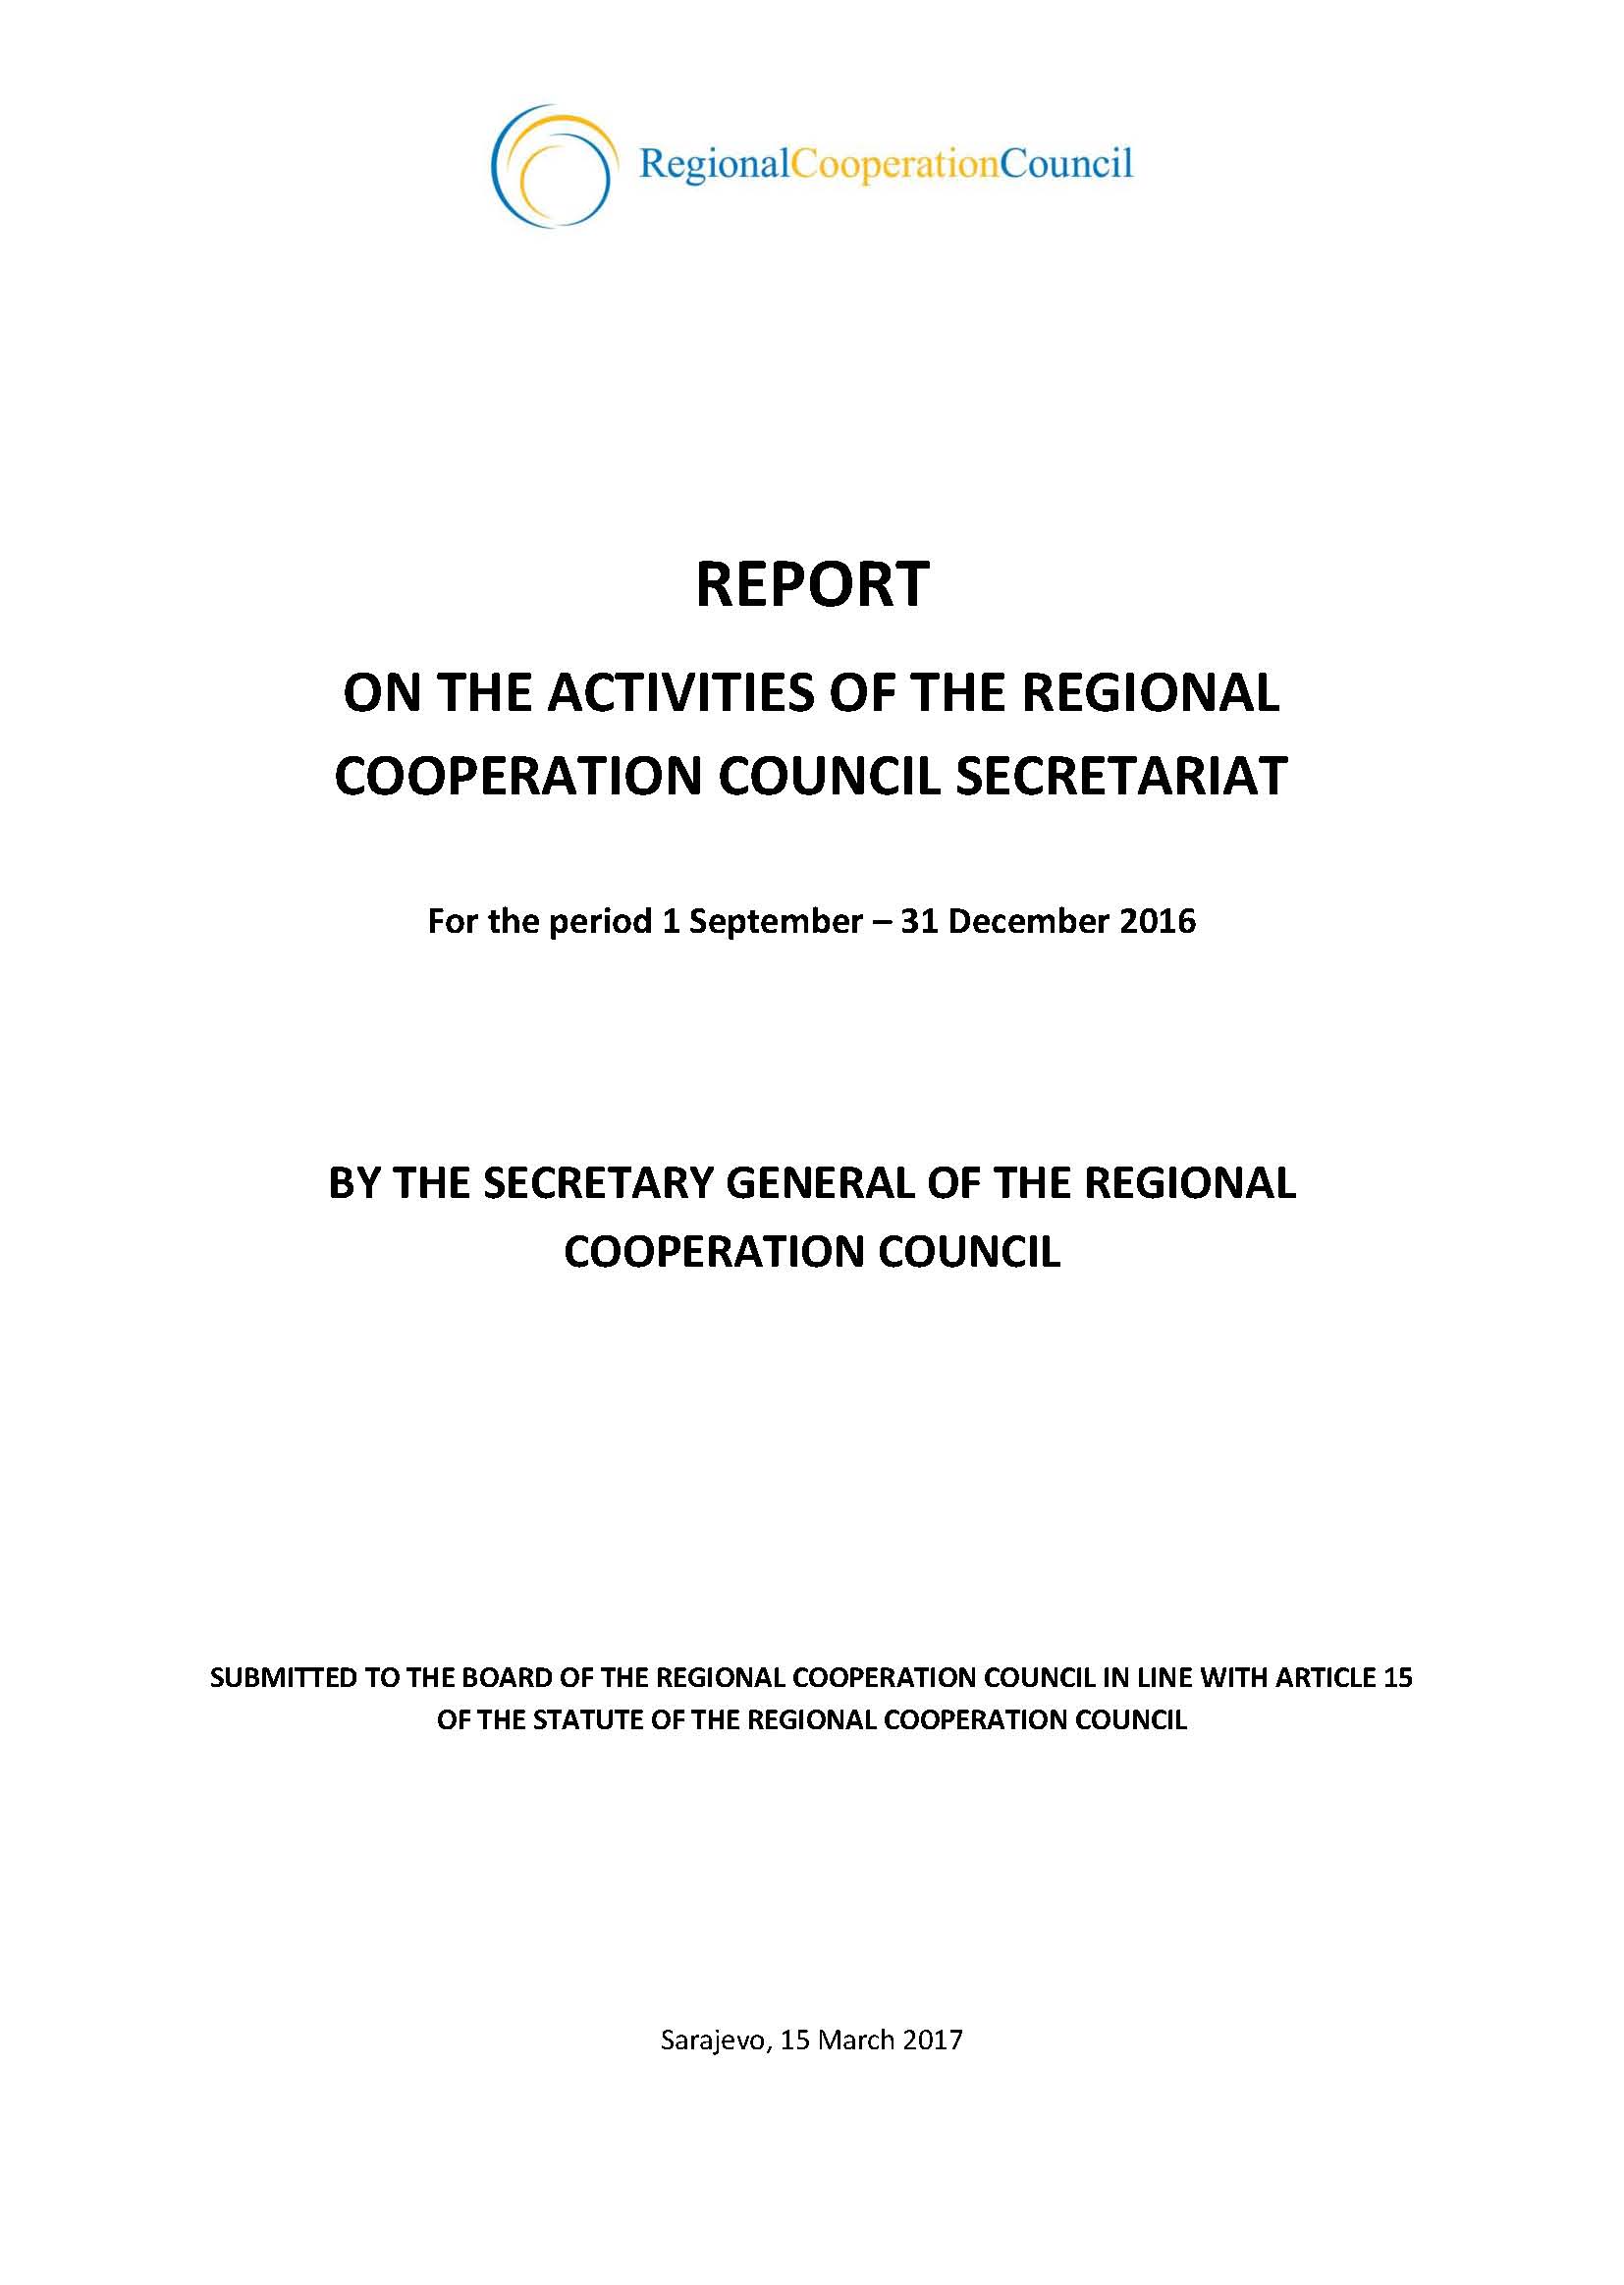 Report on the activities of the Regional Cooperation Council Secretariat for the period 1 September – 31 December 2016